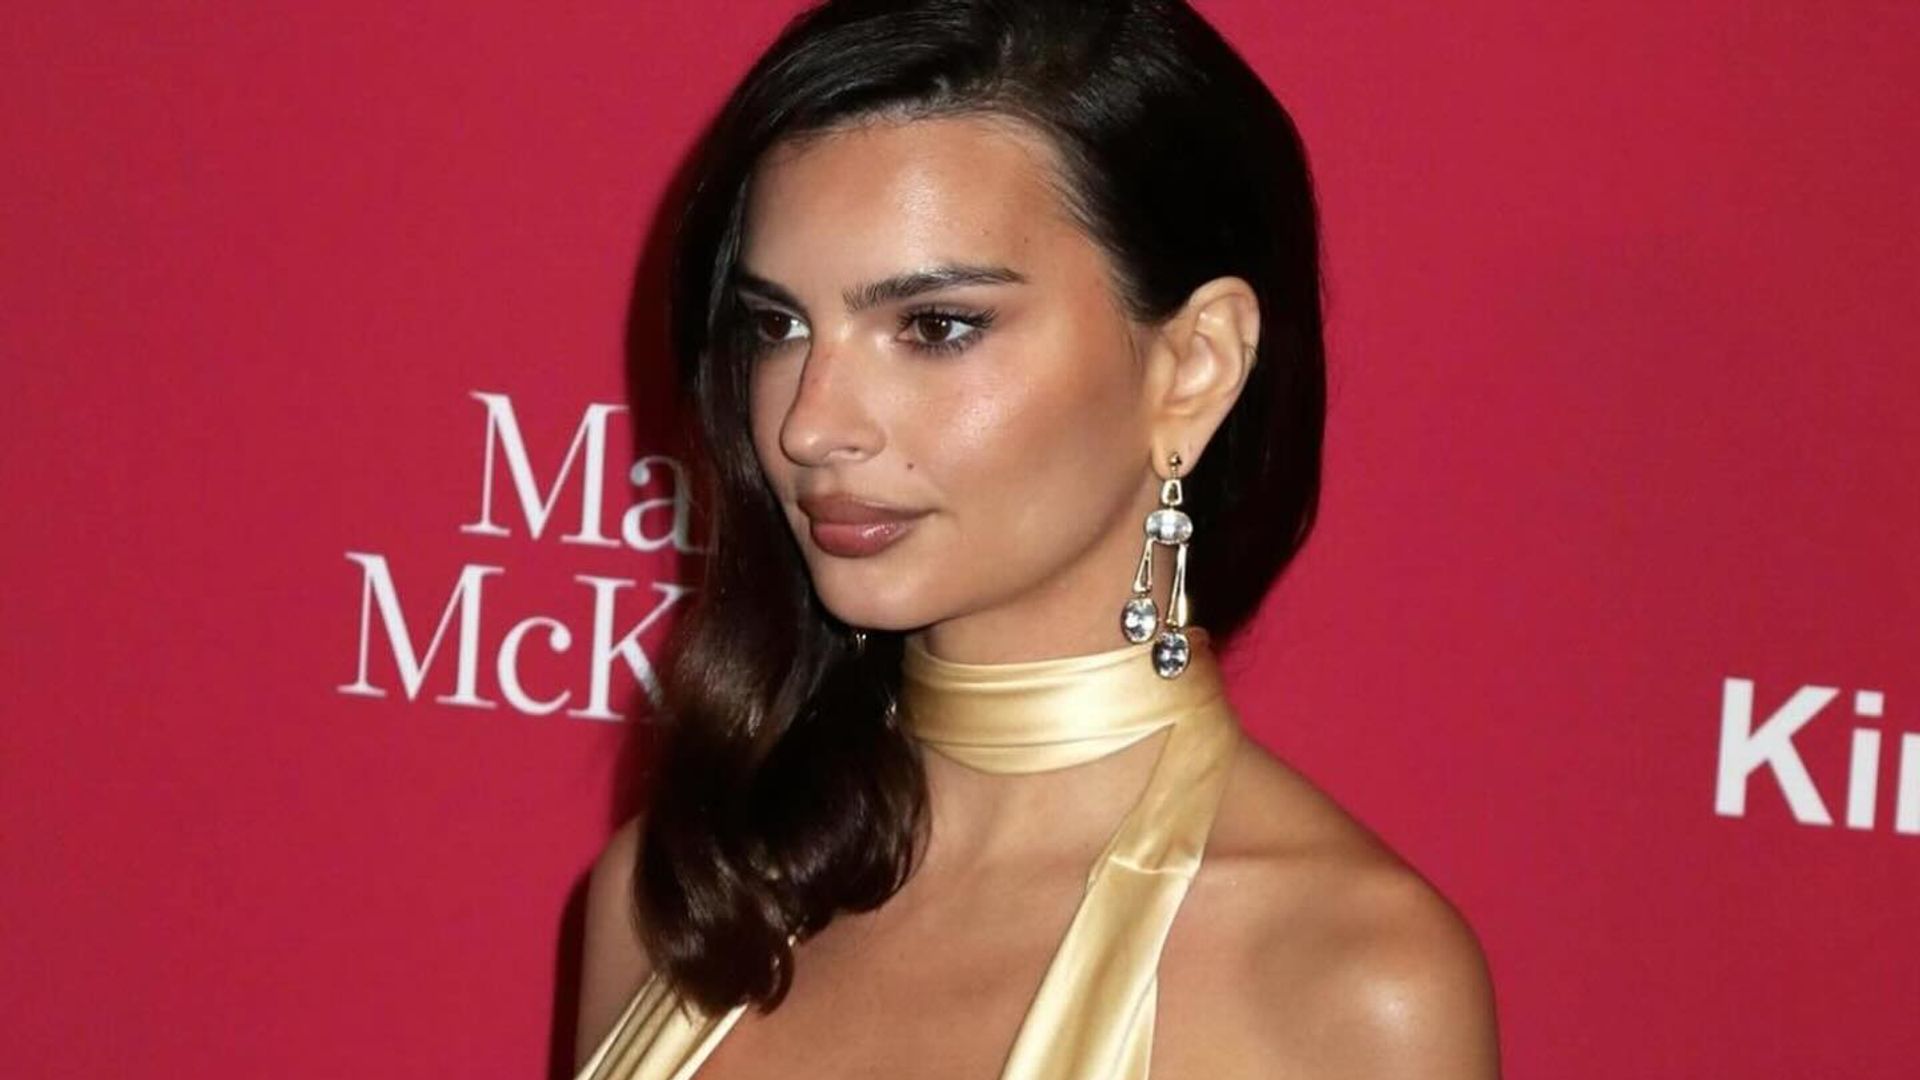 Emily Ratajkowski just wore a plunging neckline gown in spring's most notable hue